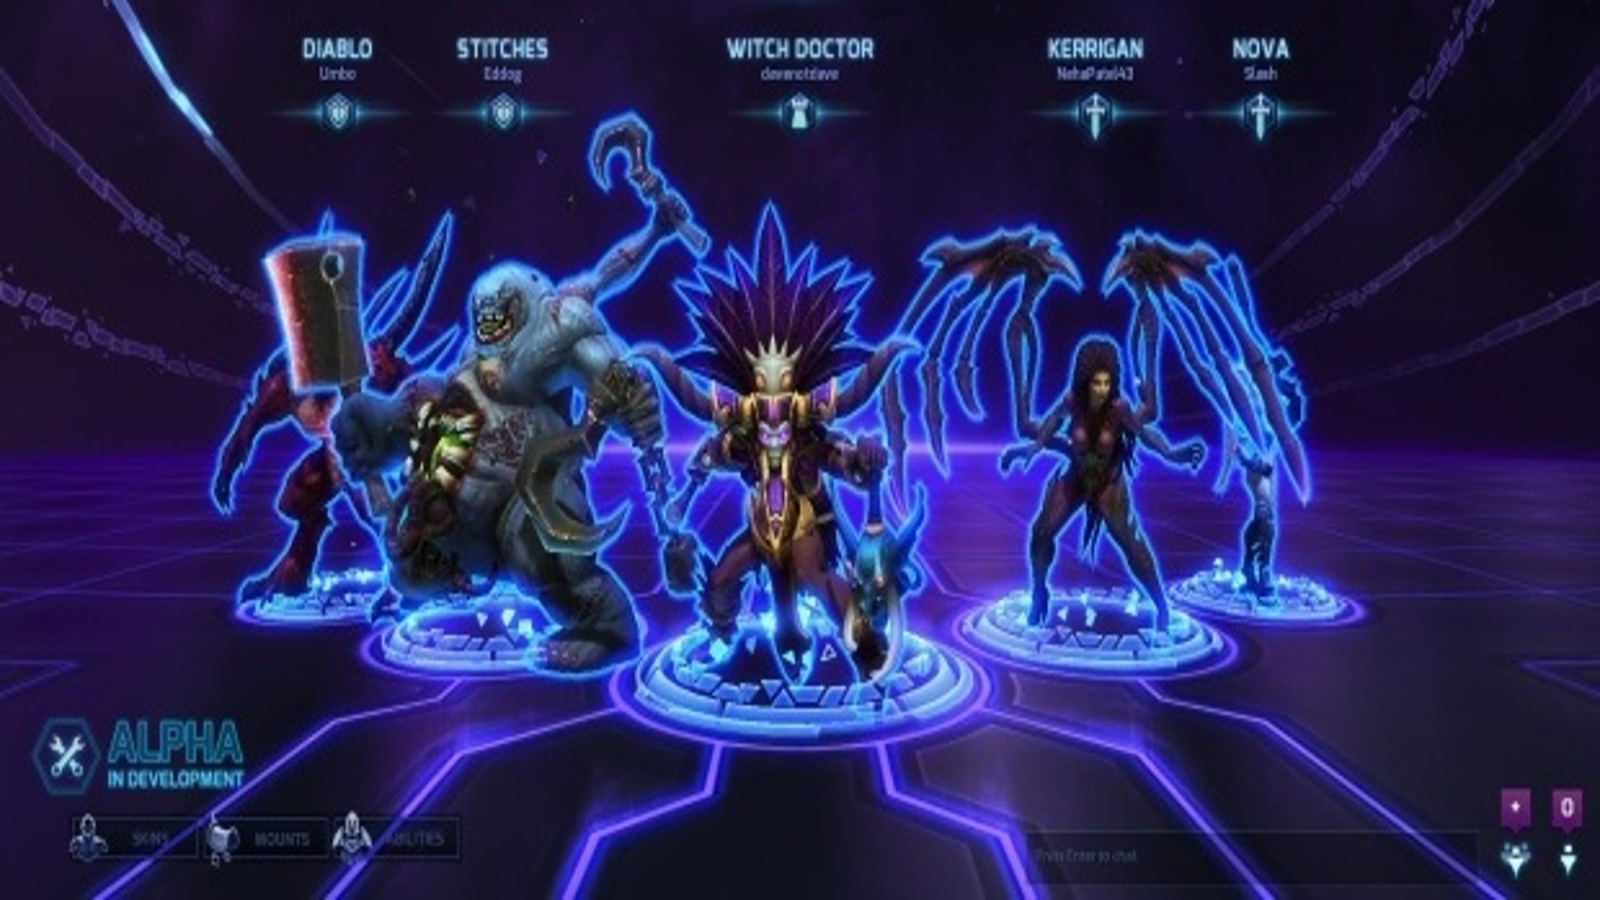 Heroes of the Storm - We've been hard at work on a number of UI